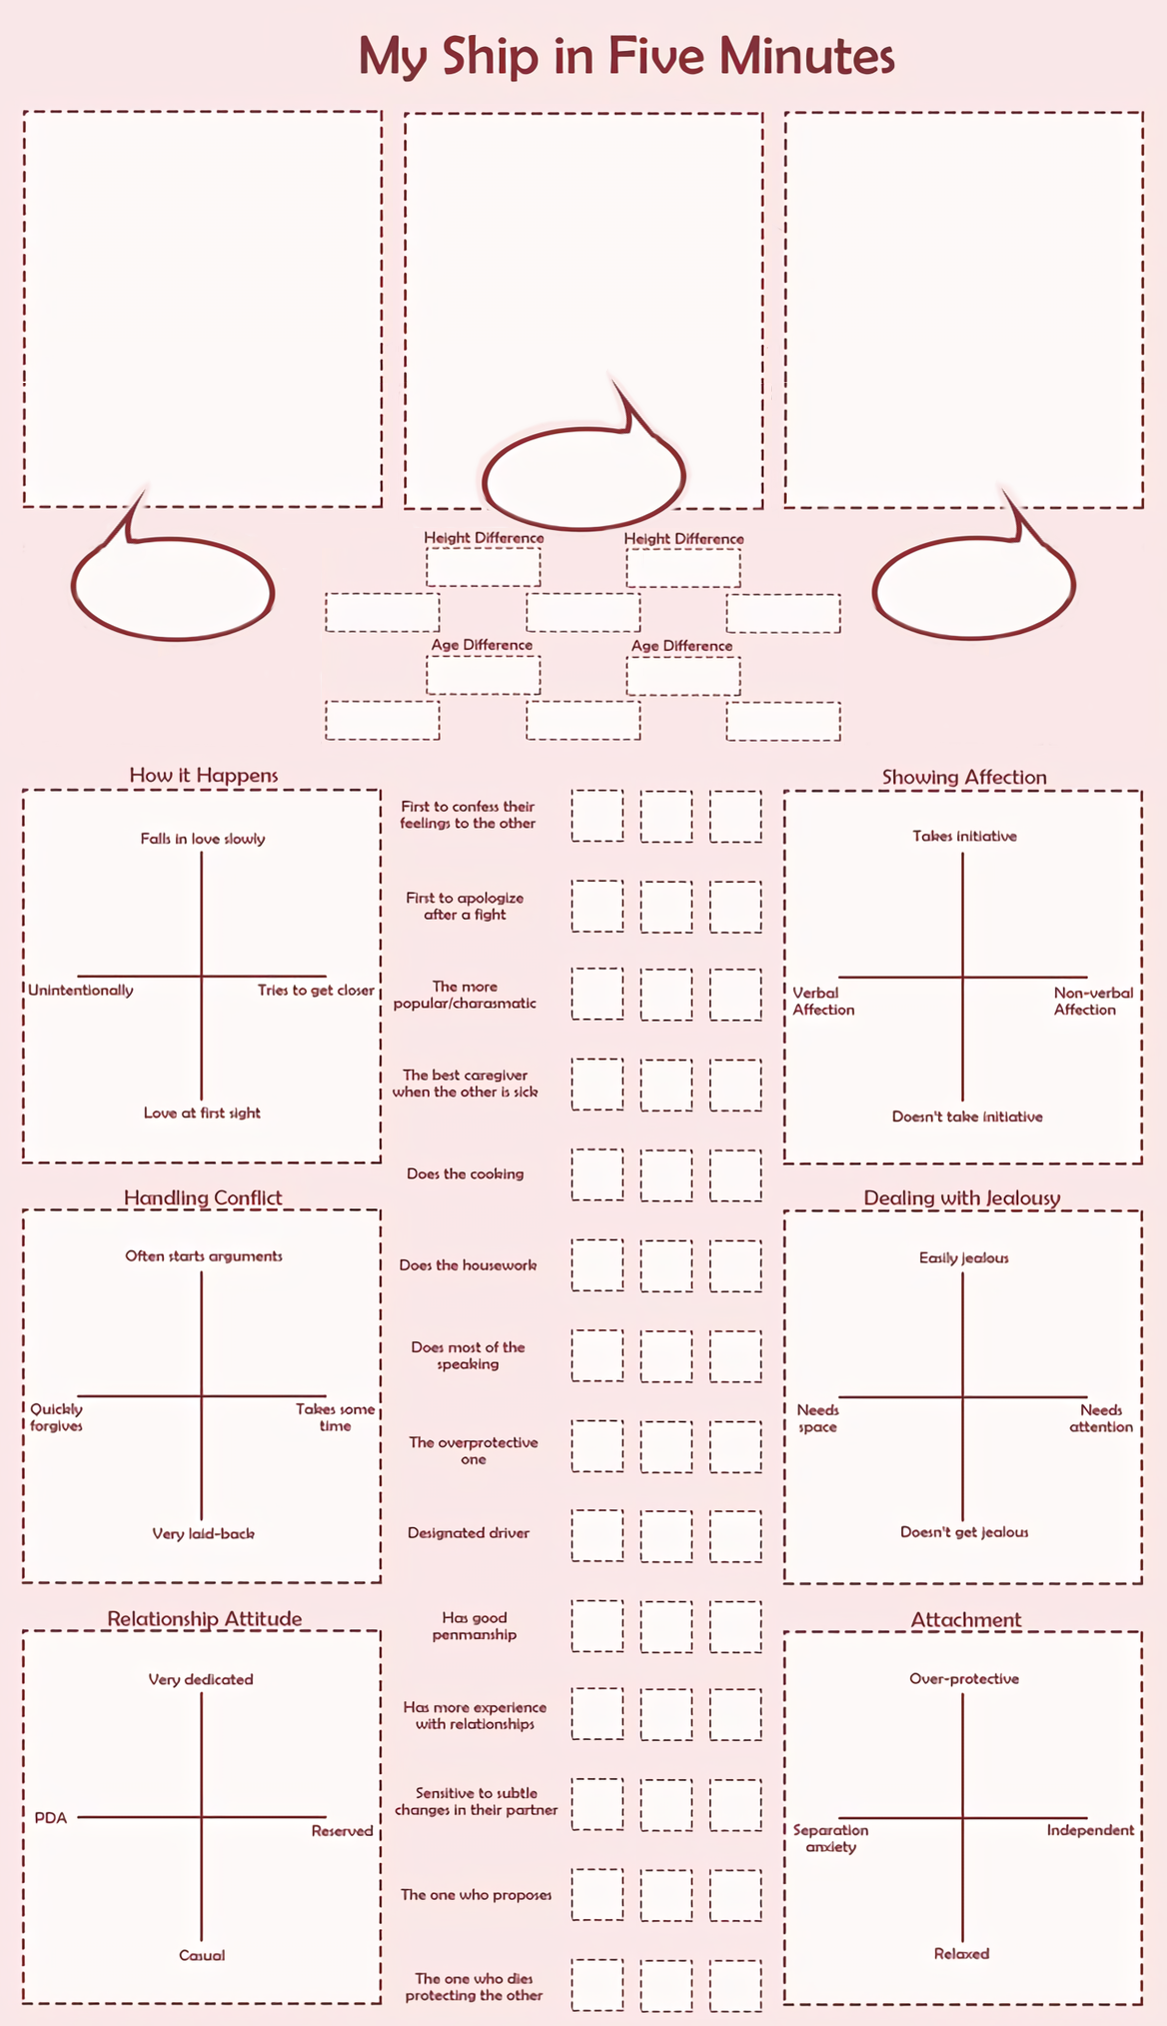 poly-ship-in-five-minutes-template-by-bunnyarcana-on-deviantart